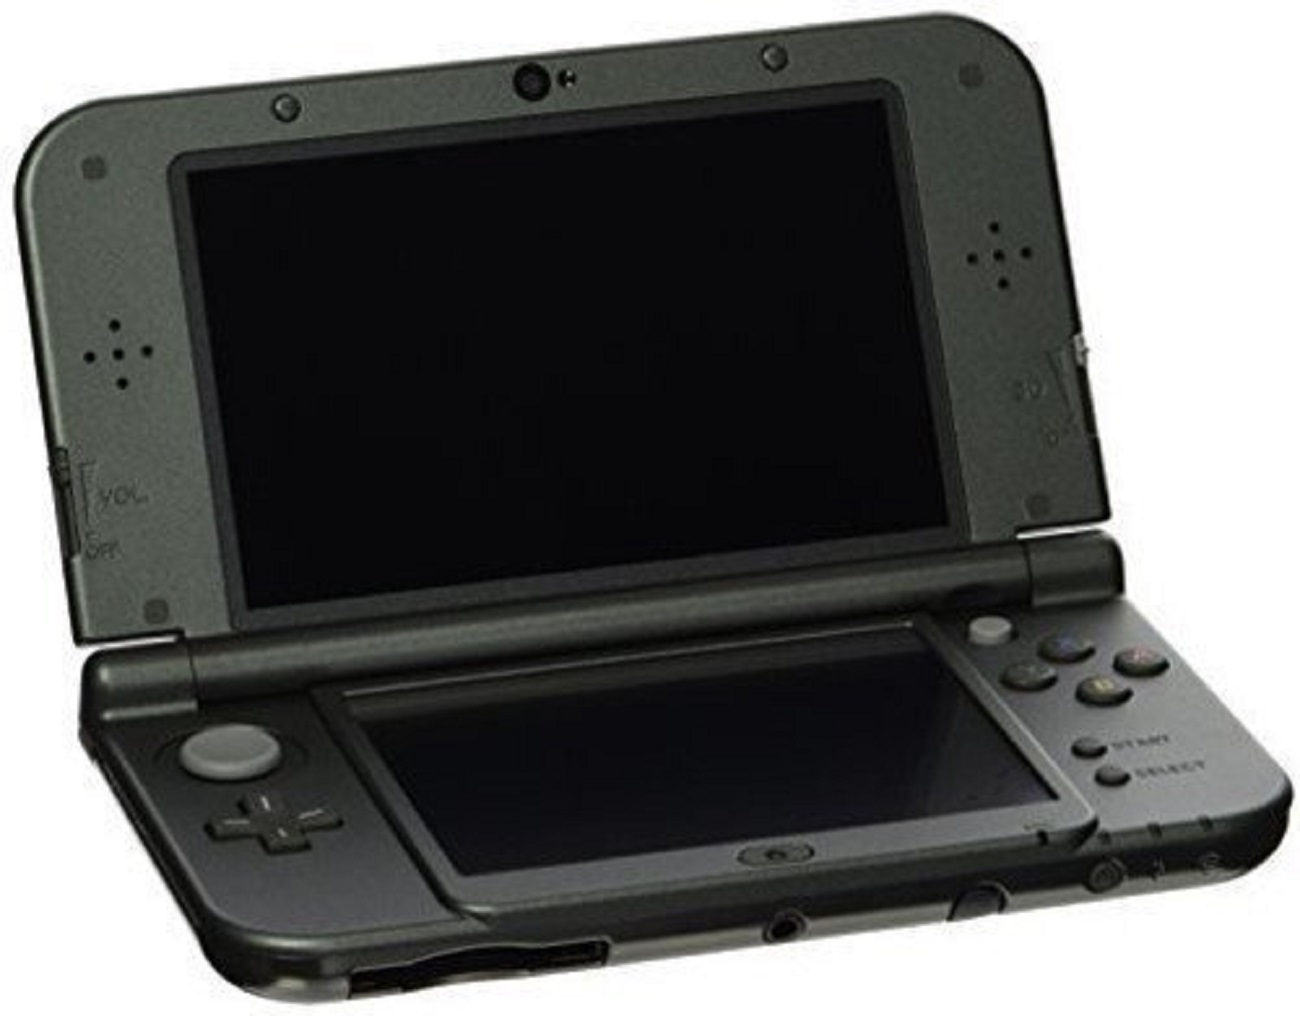 3DS XL System - image 2 of 5